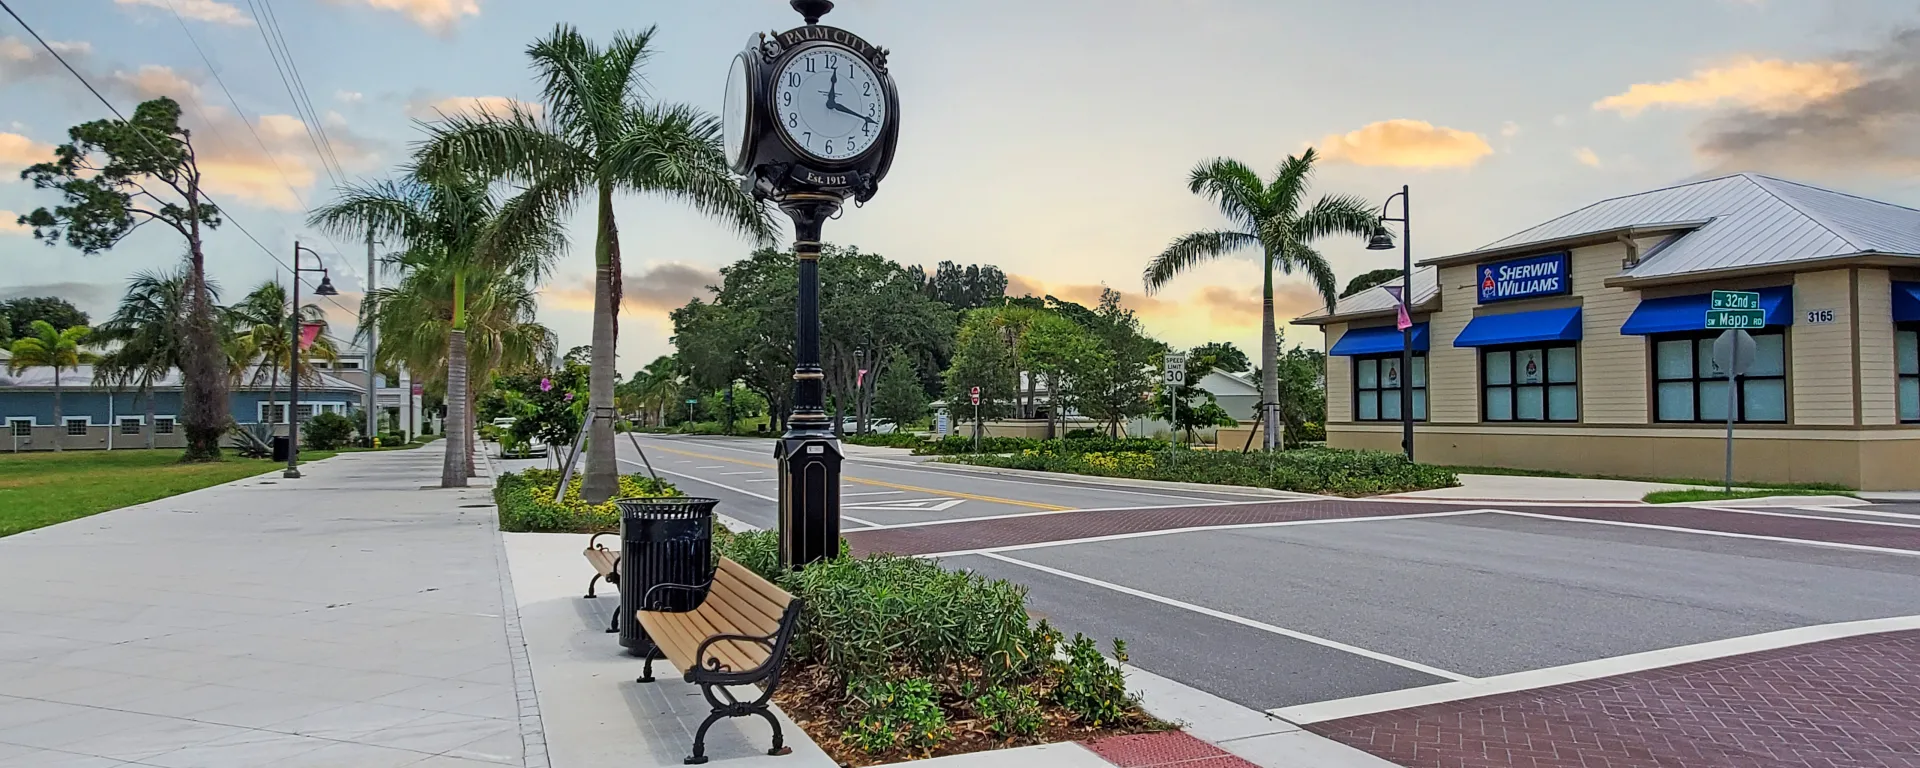 Image of Mapp Road in Palm City during sunrise with a view of the vintage town square clock.